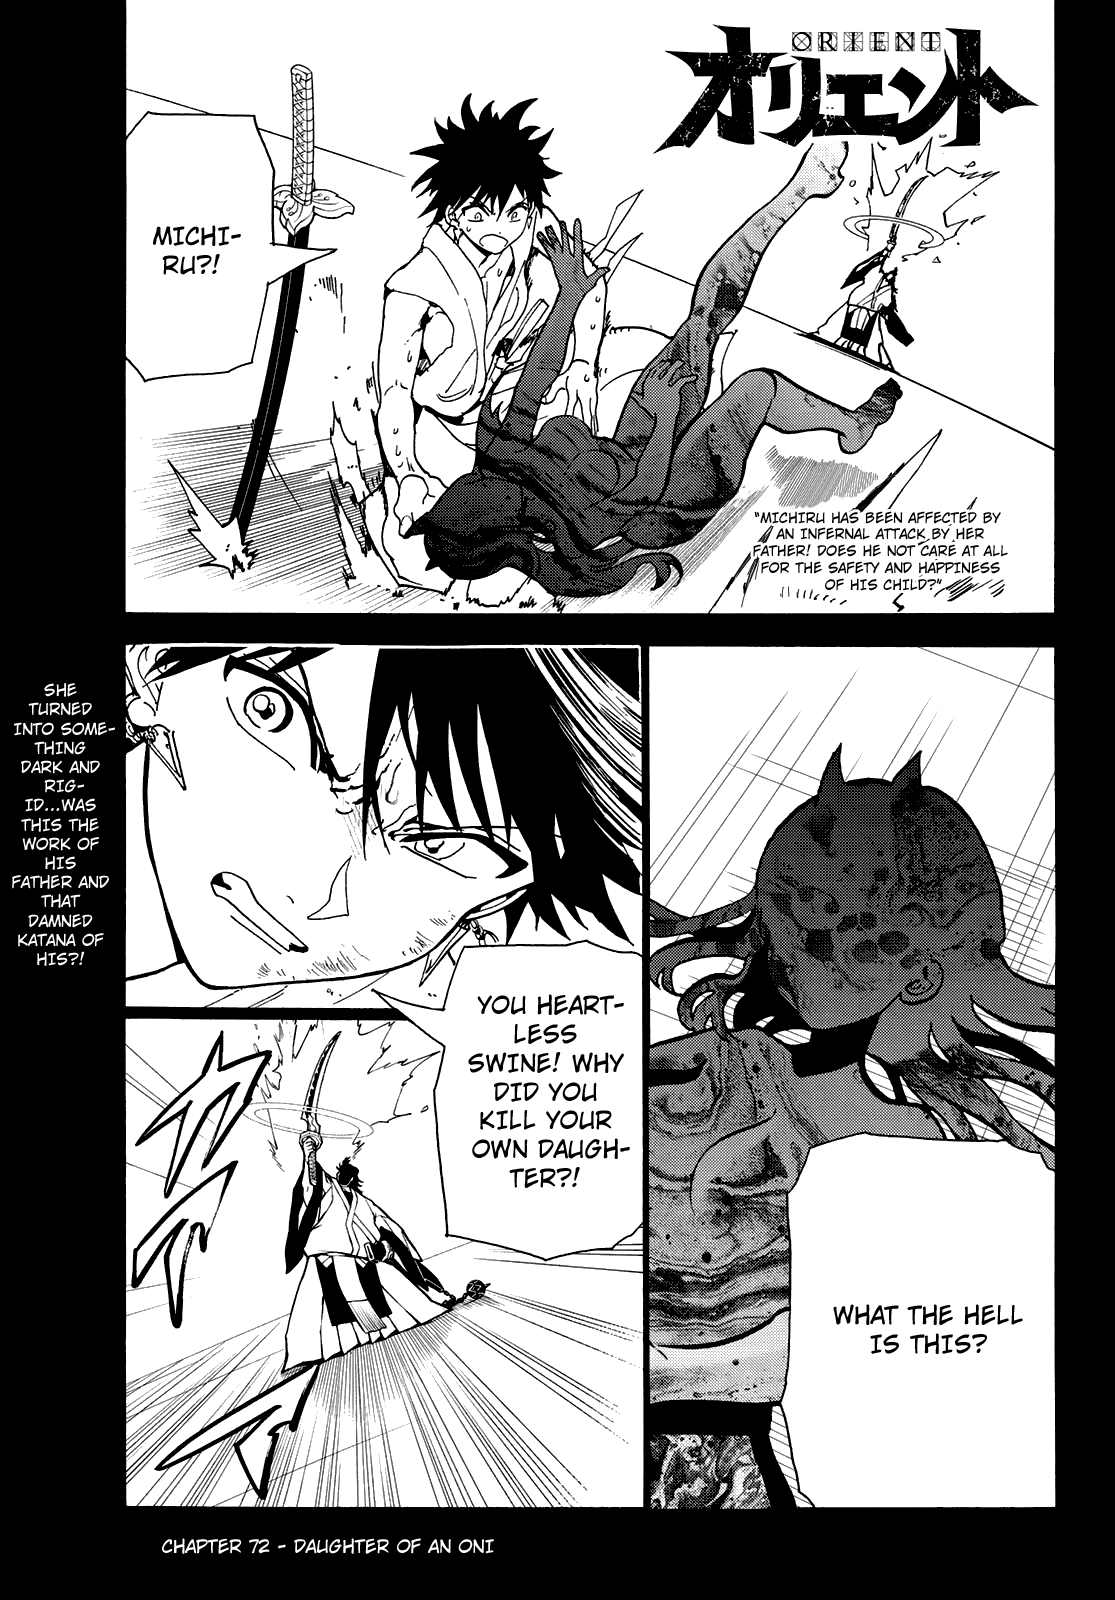 Orient Vol. 8 Ch. 72 Daughter of an Oni